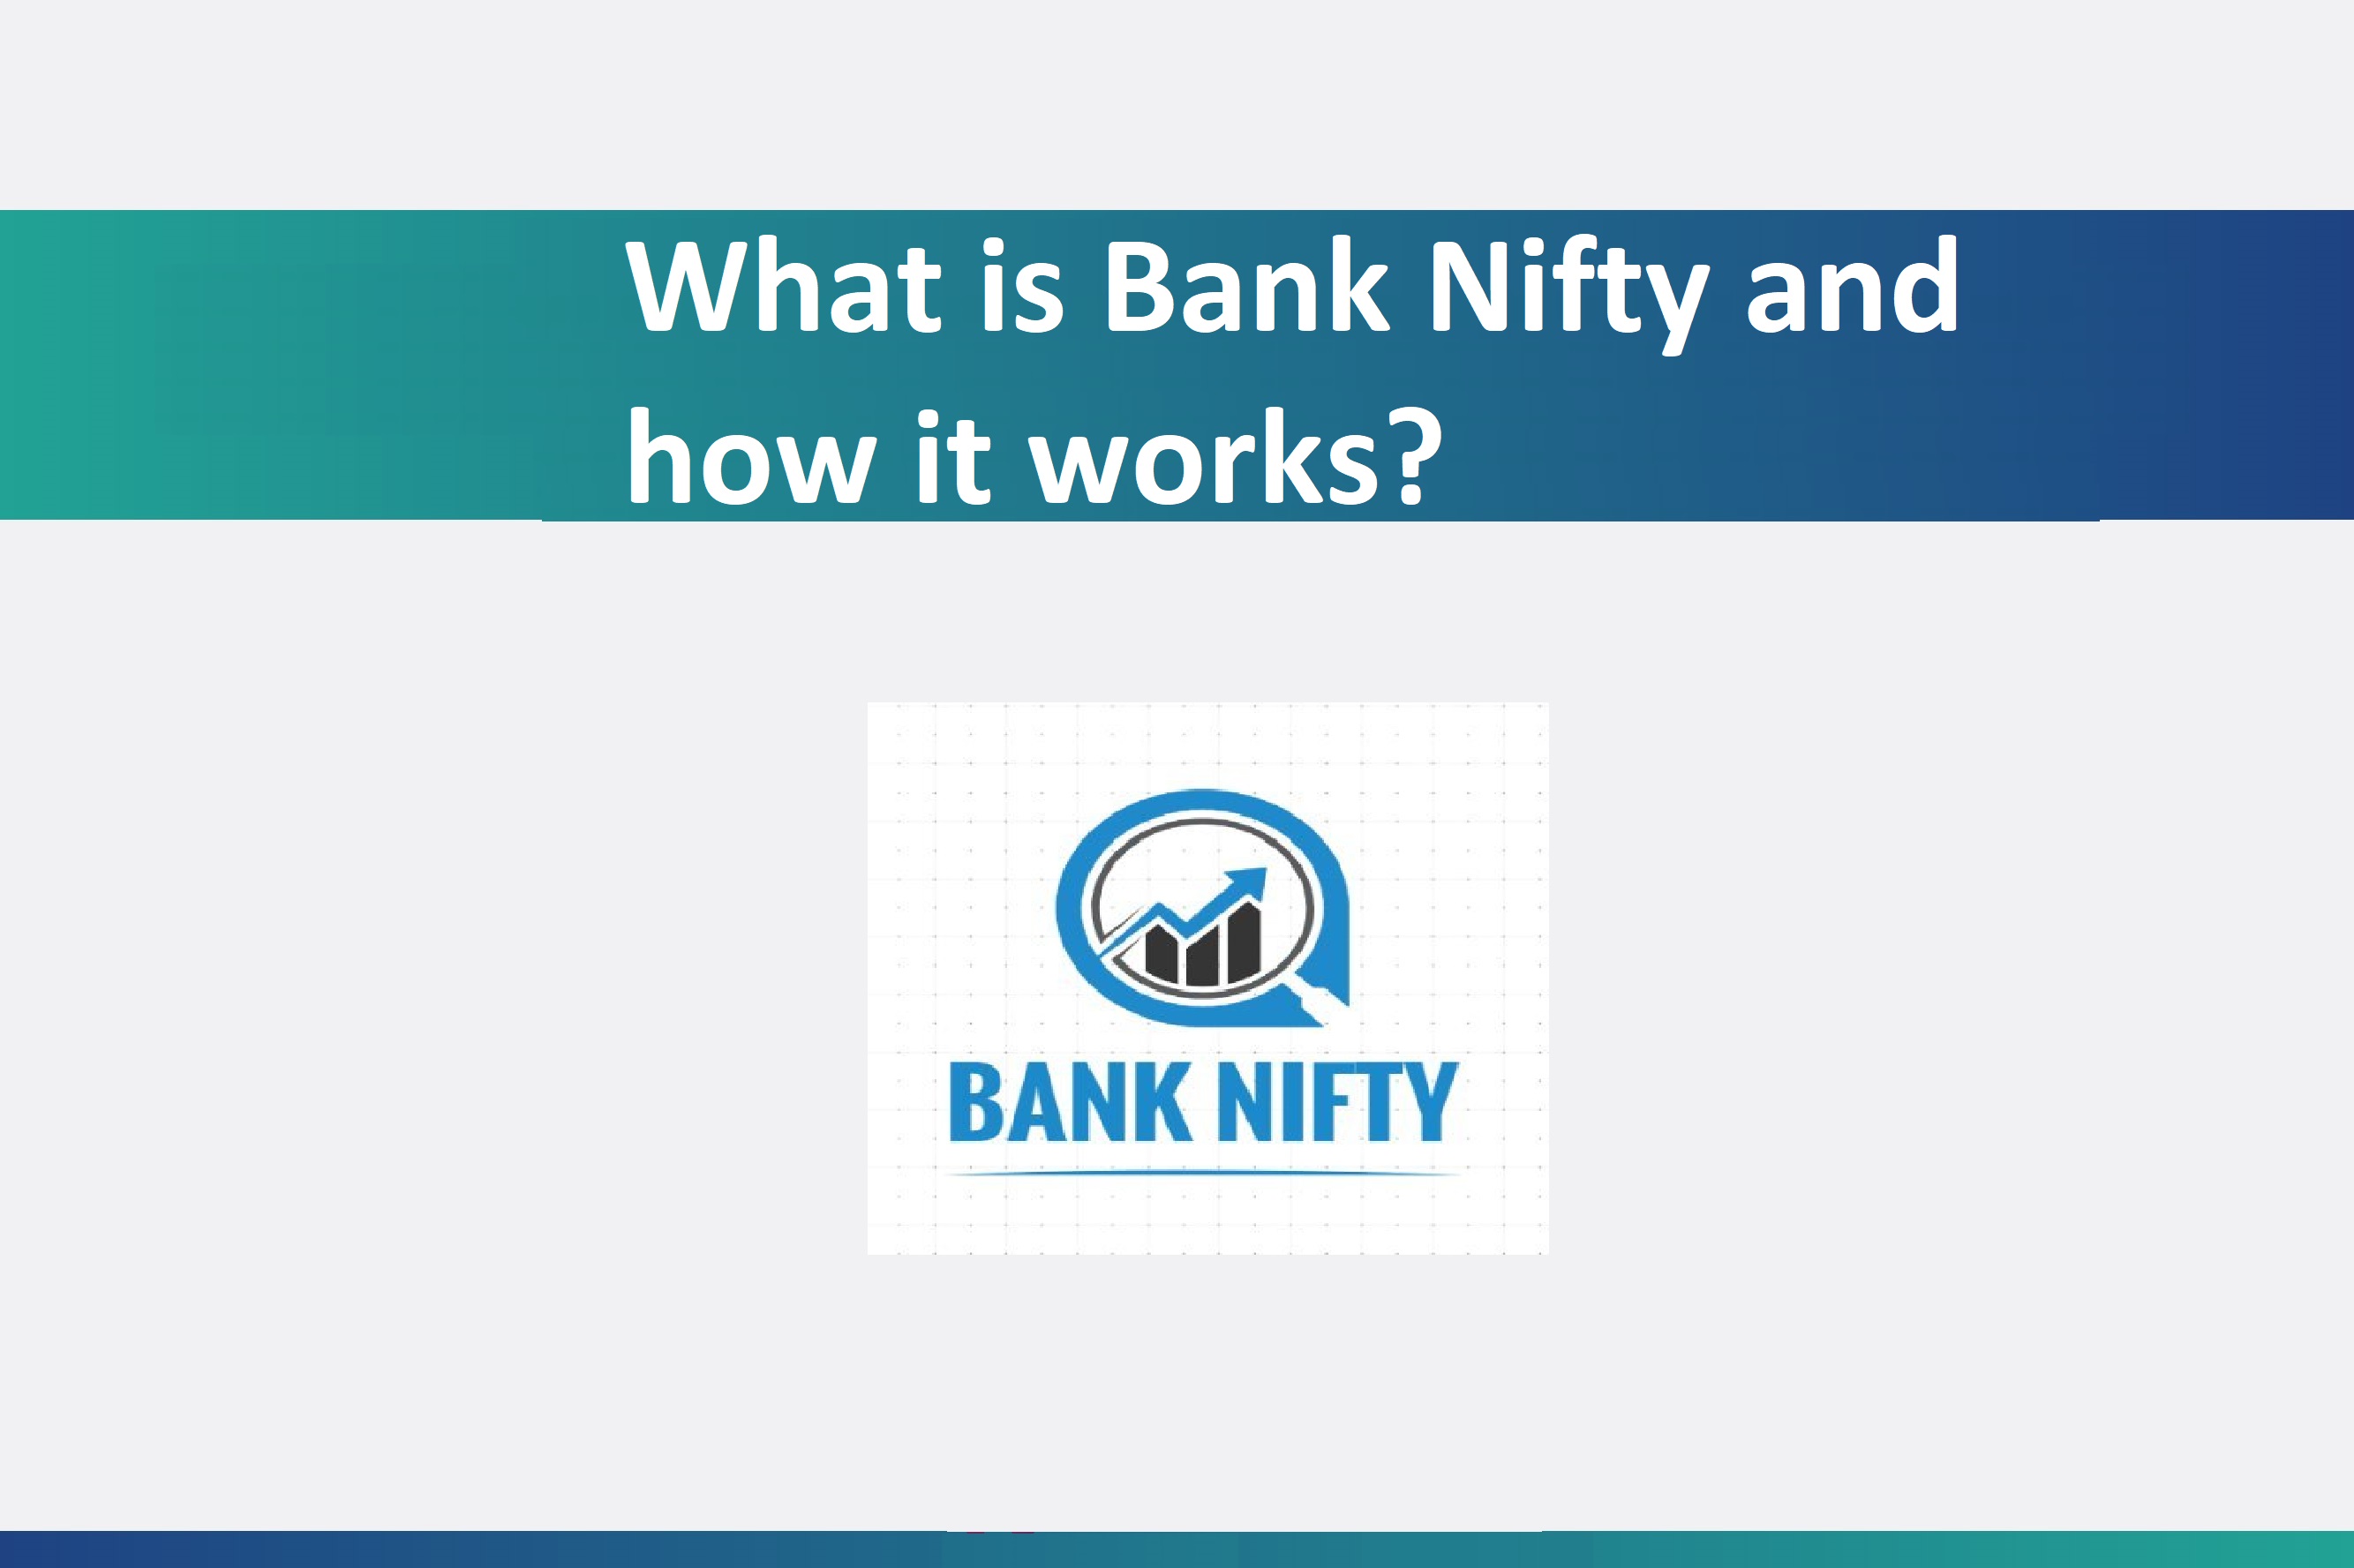 What is Bank Nifty and how it works?